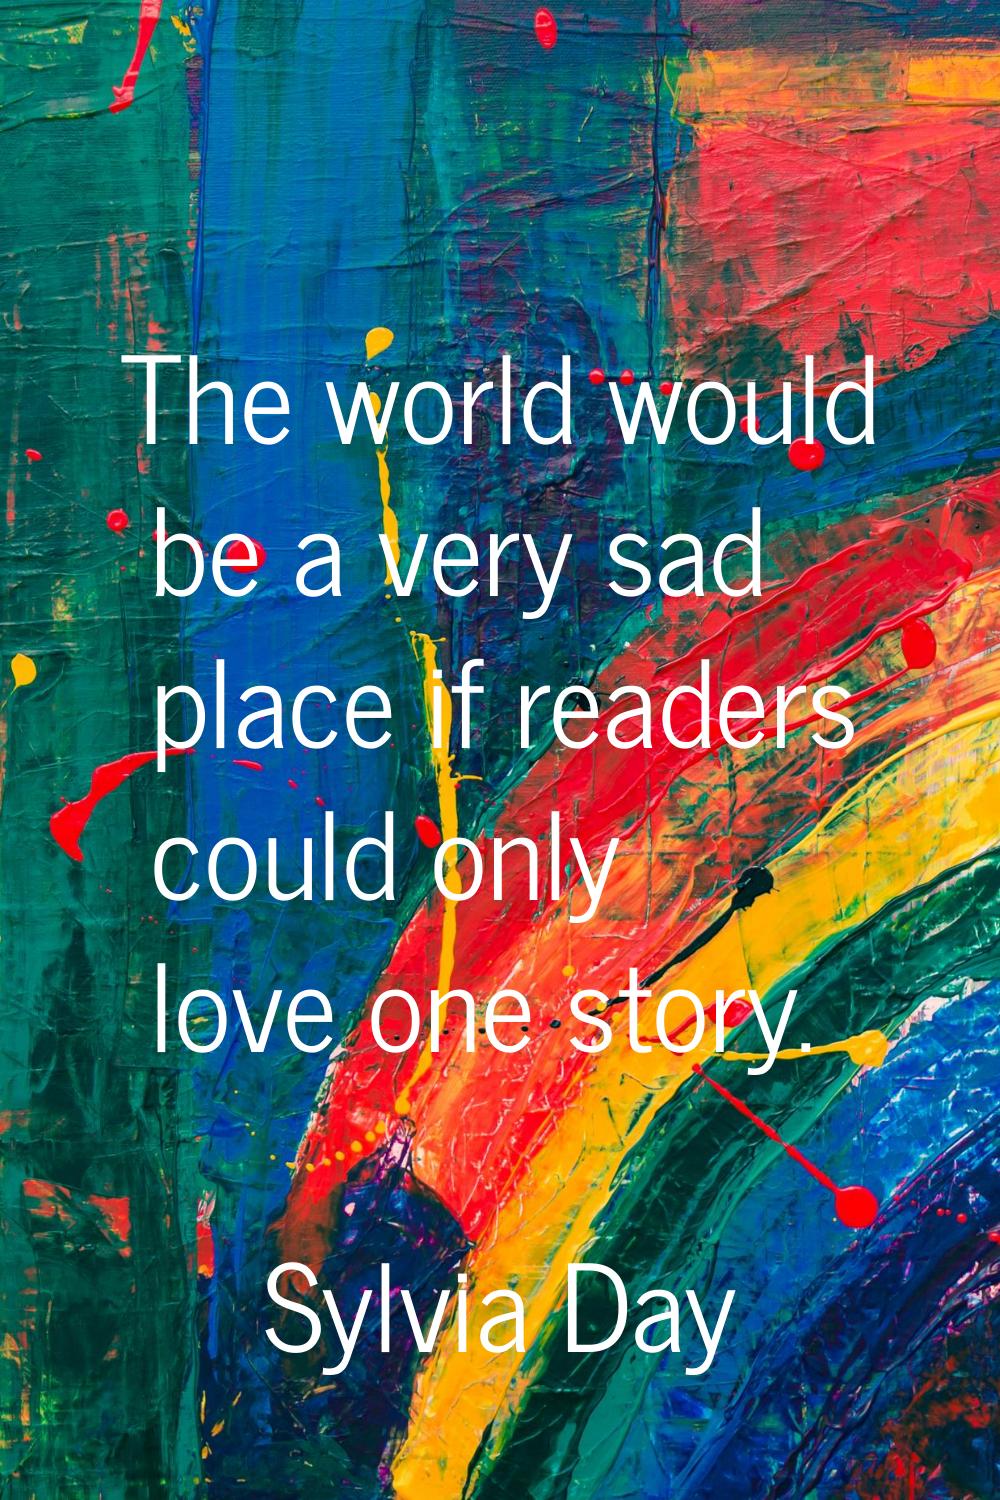 The world would be a very sad place if readers could only love one story.